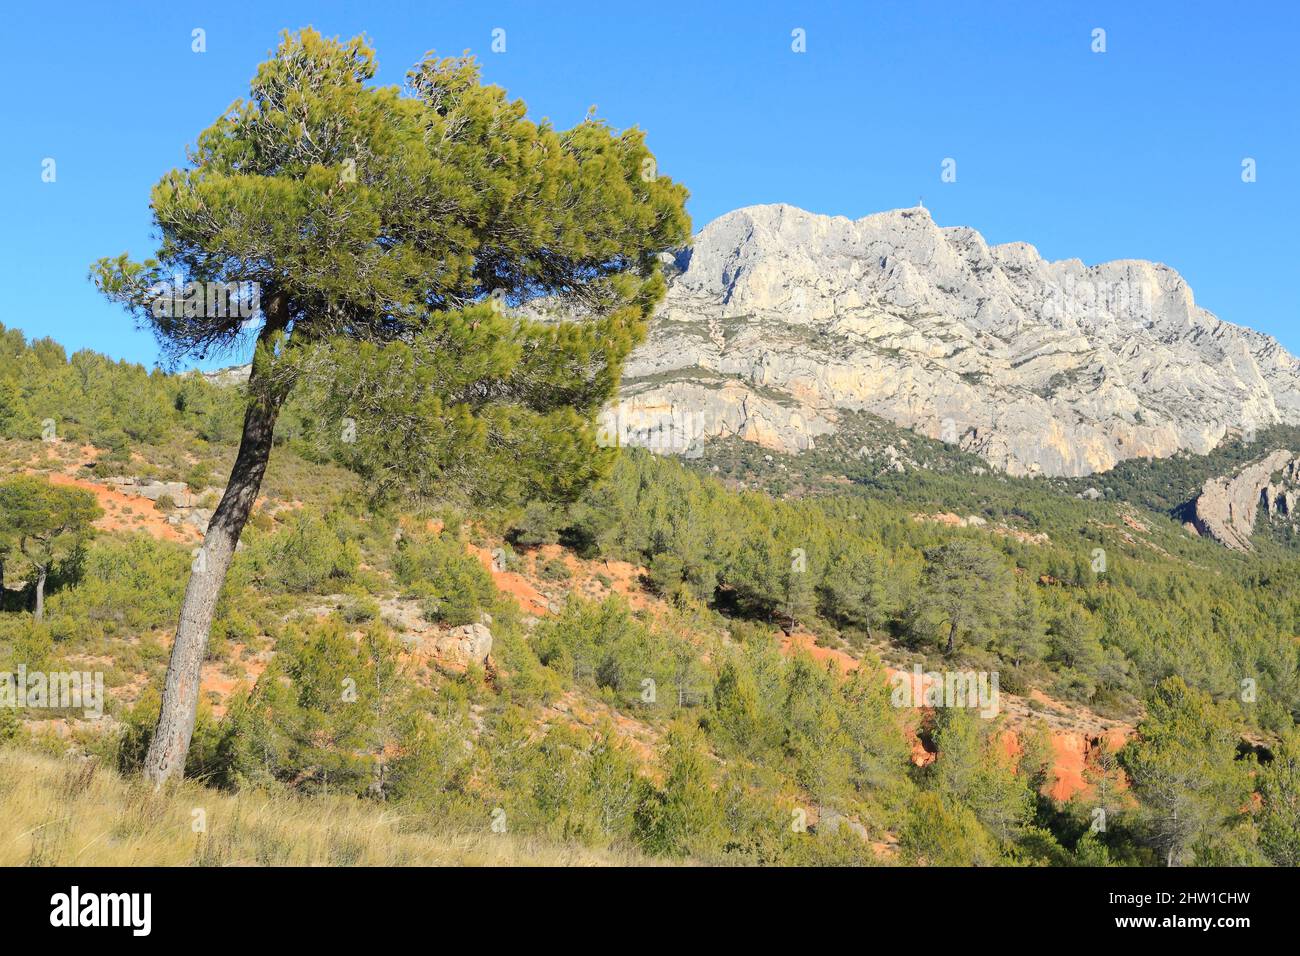 France, Bouches du Rhone, Grand Site Concors Sainte Victoire, departmental domain of Roques Hautes, Beaurecueil, pines with the Sainte Victoire mountain in the background Stock Photo